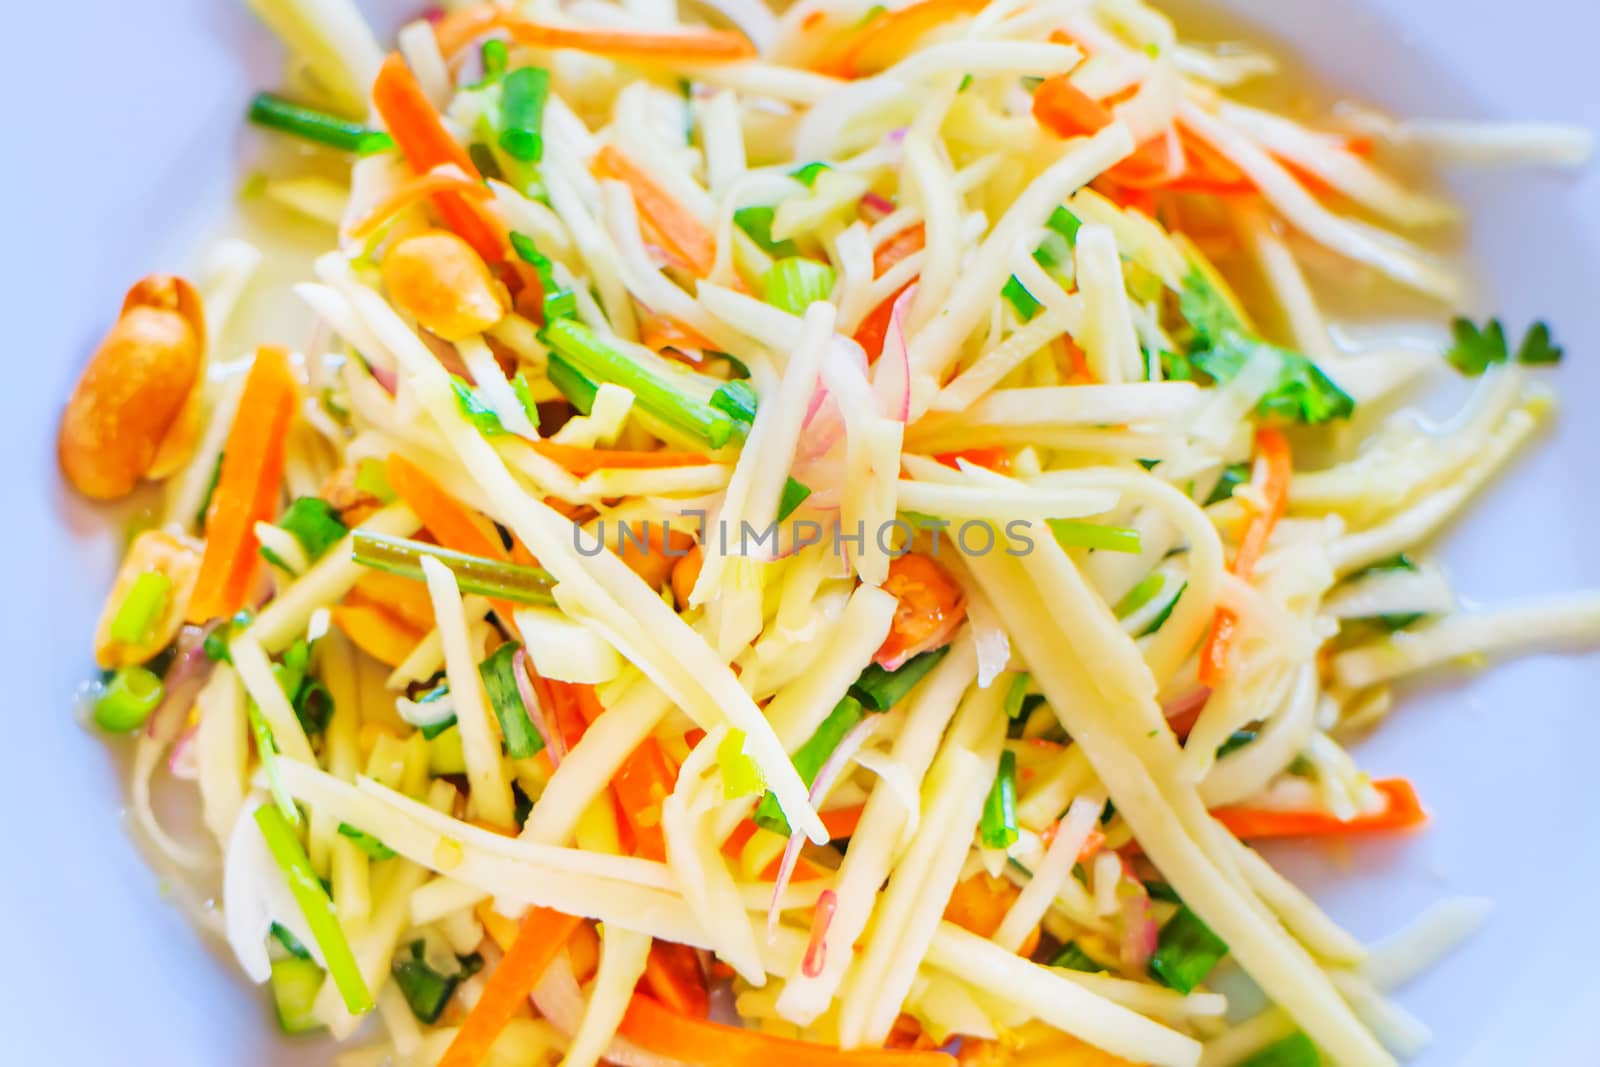 A spicy mango salad with vegetable and chili.